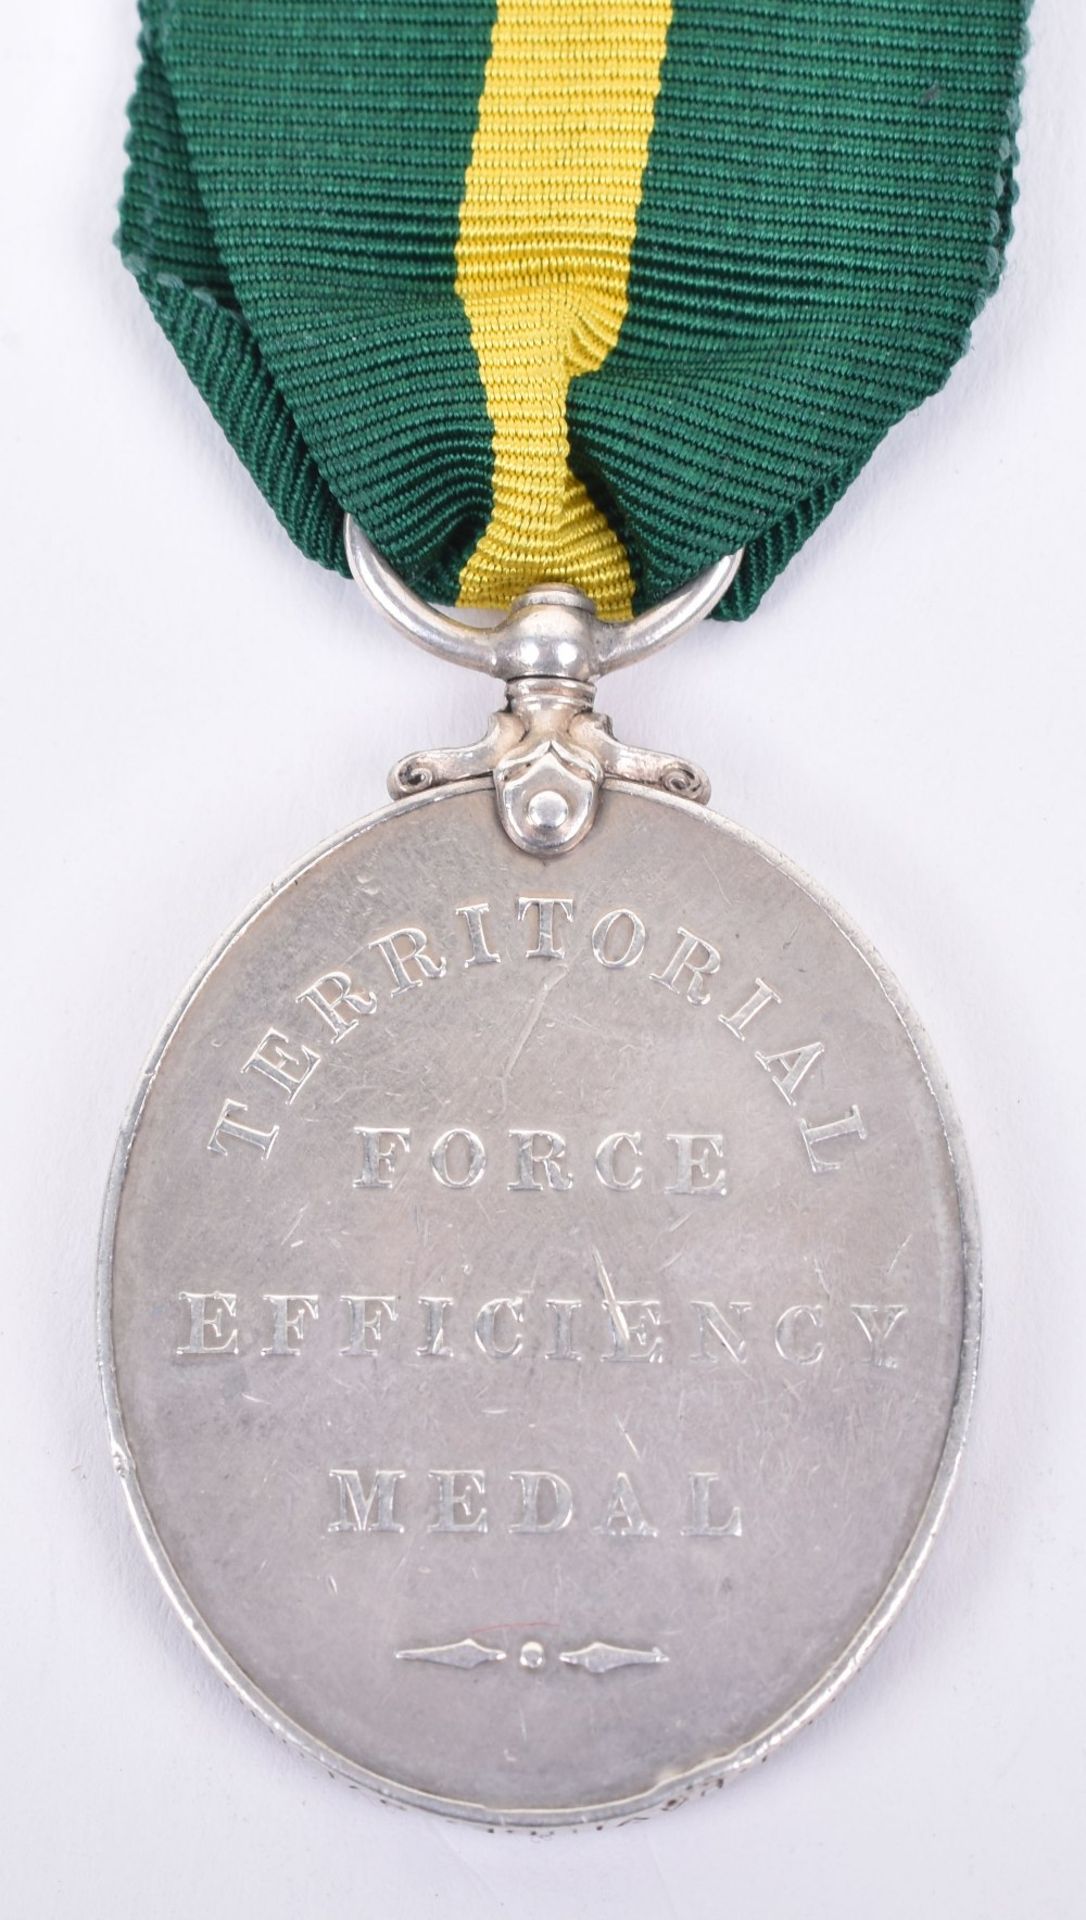 Rare George V Territorial Force Efficiency Medal with Bar 9th London Regiment - Image 4 of 4